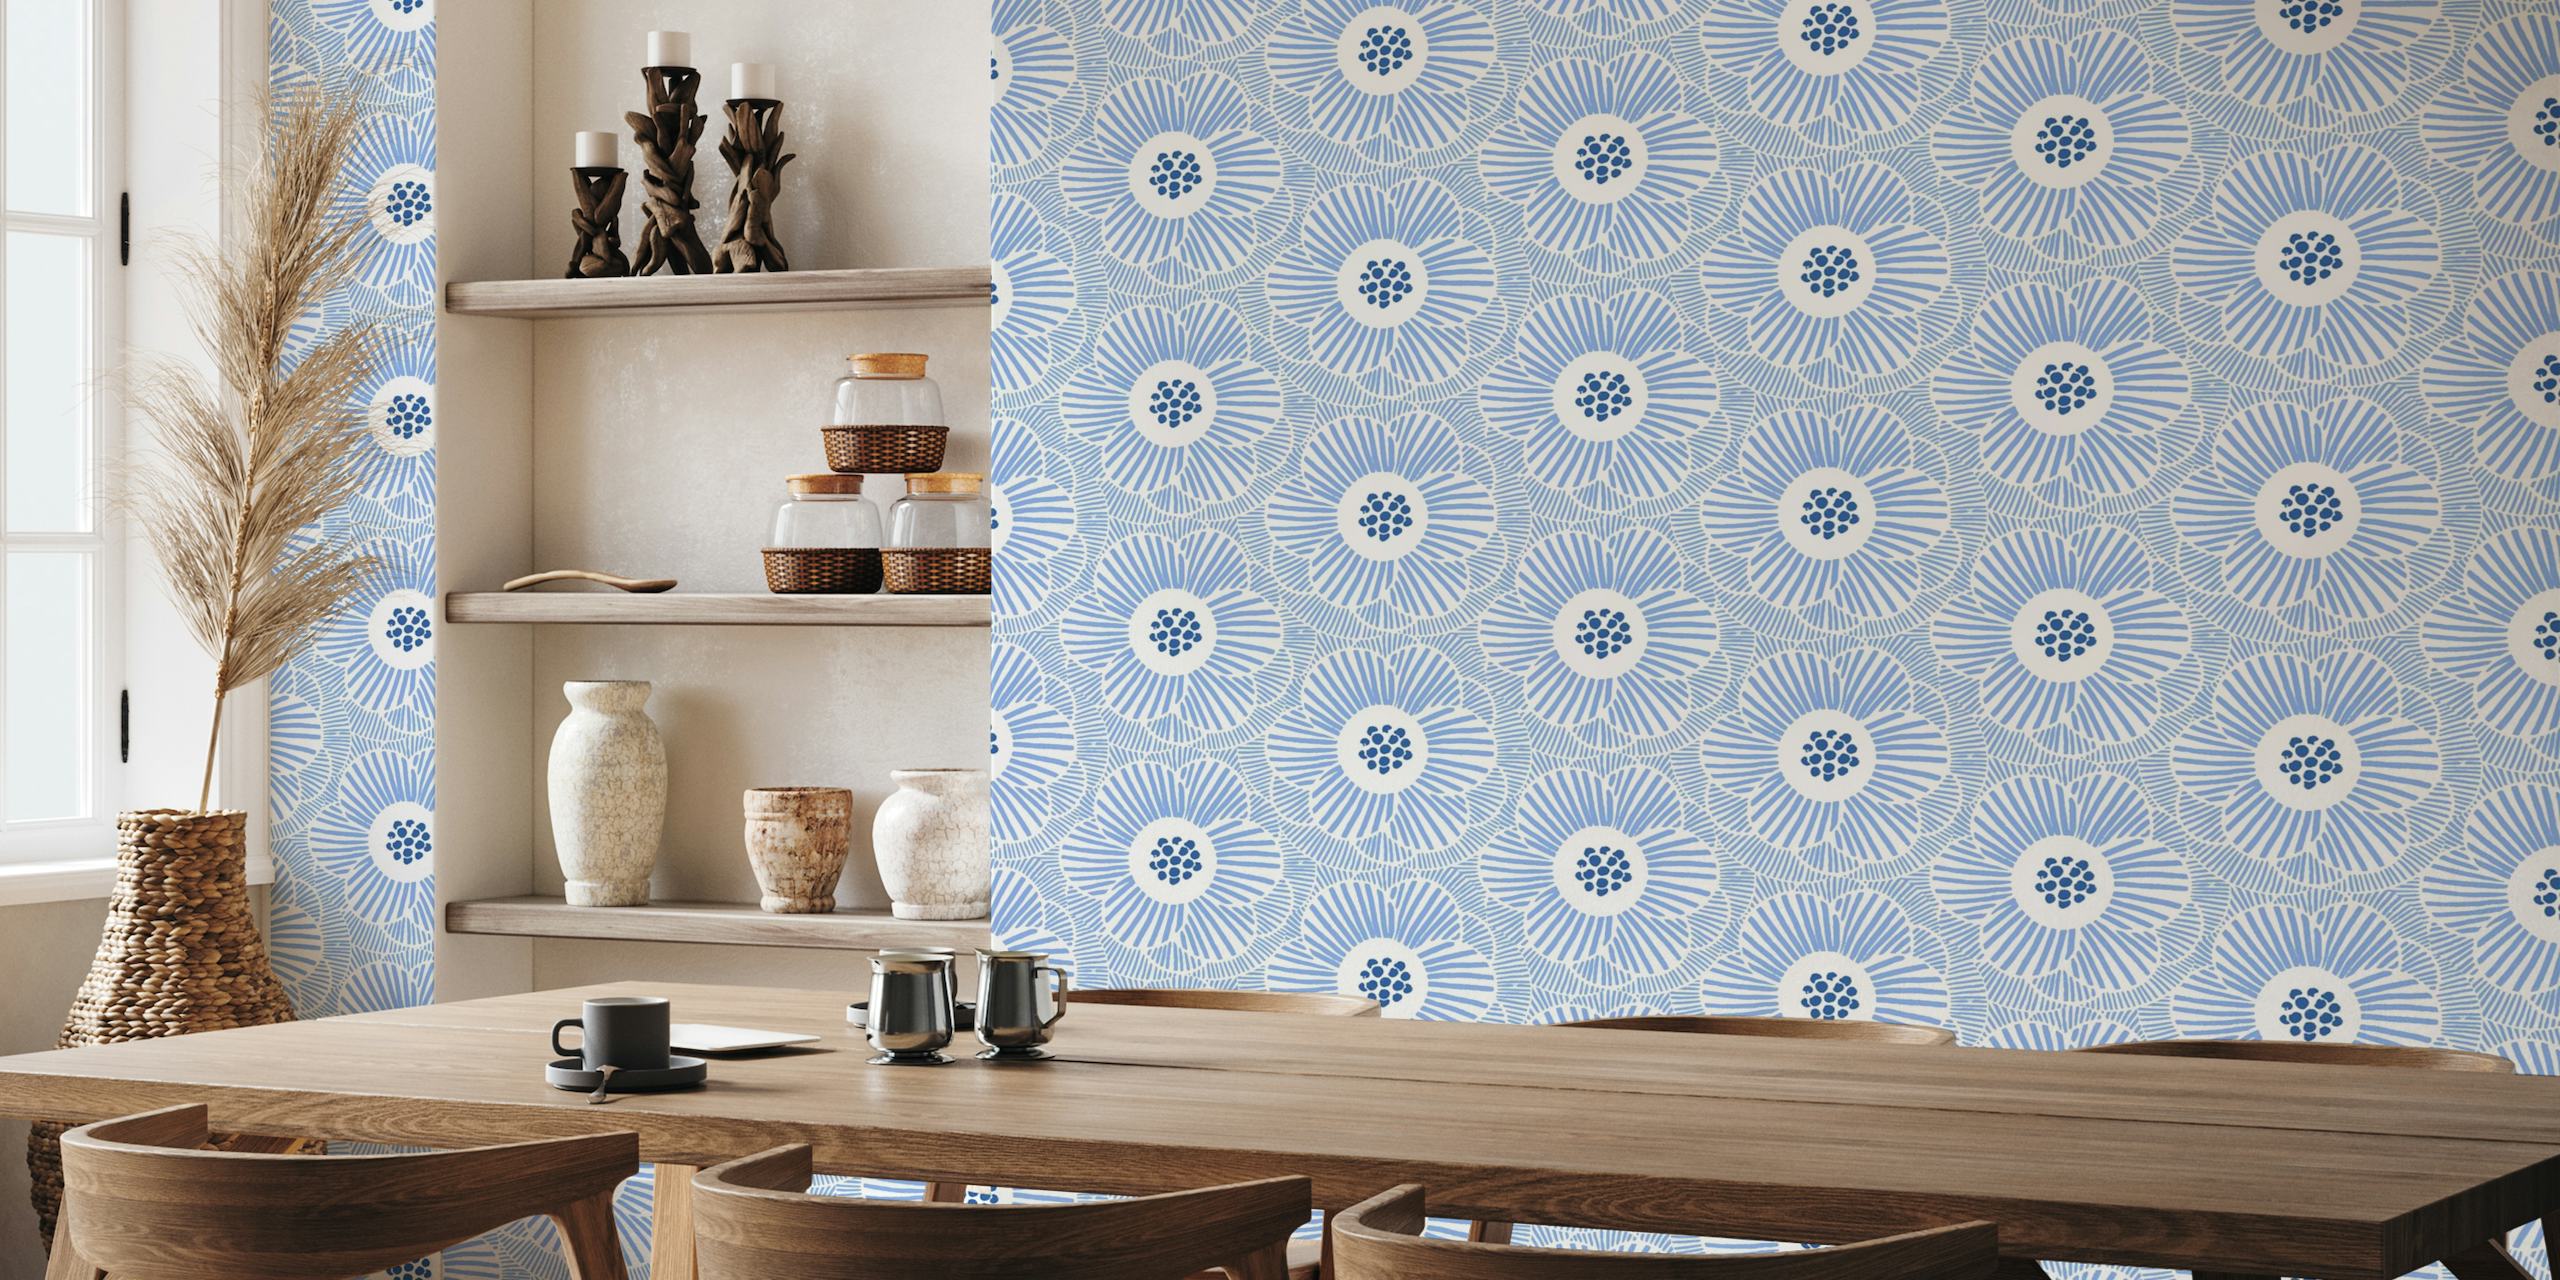 Blue camellia floral pattern wall mural with overlapping flower design